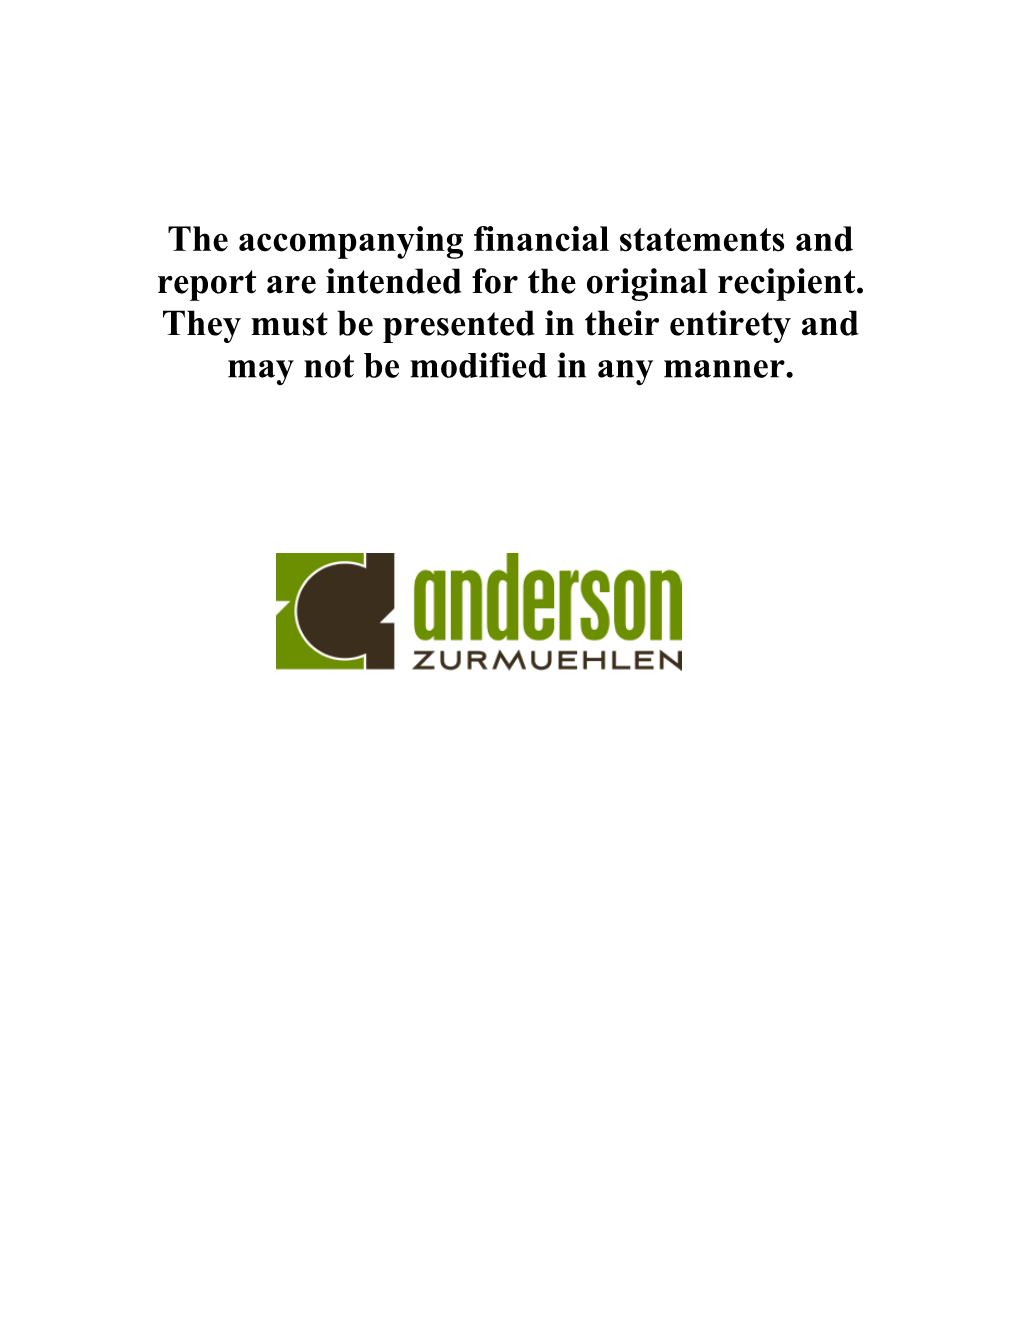 The Accompanying Financial Statements and Report Are Intended for the Original Recipient